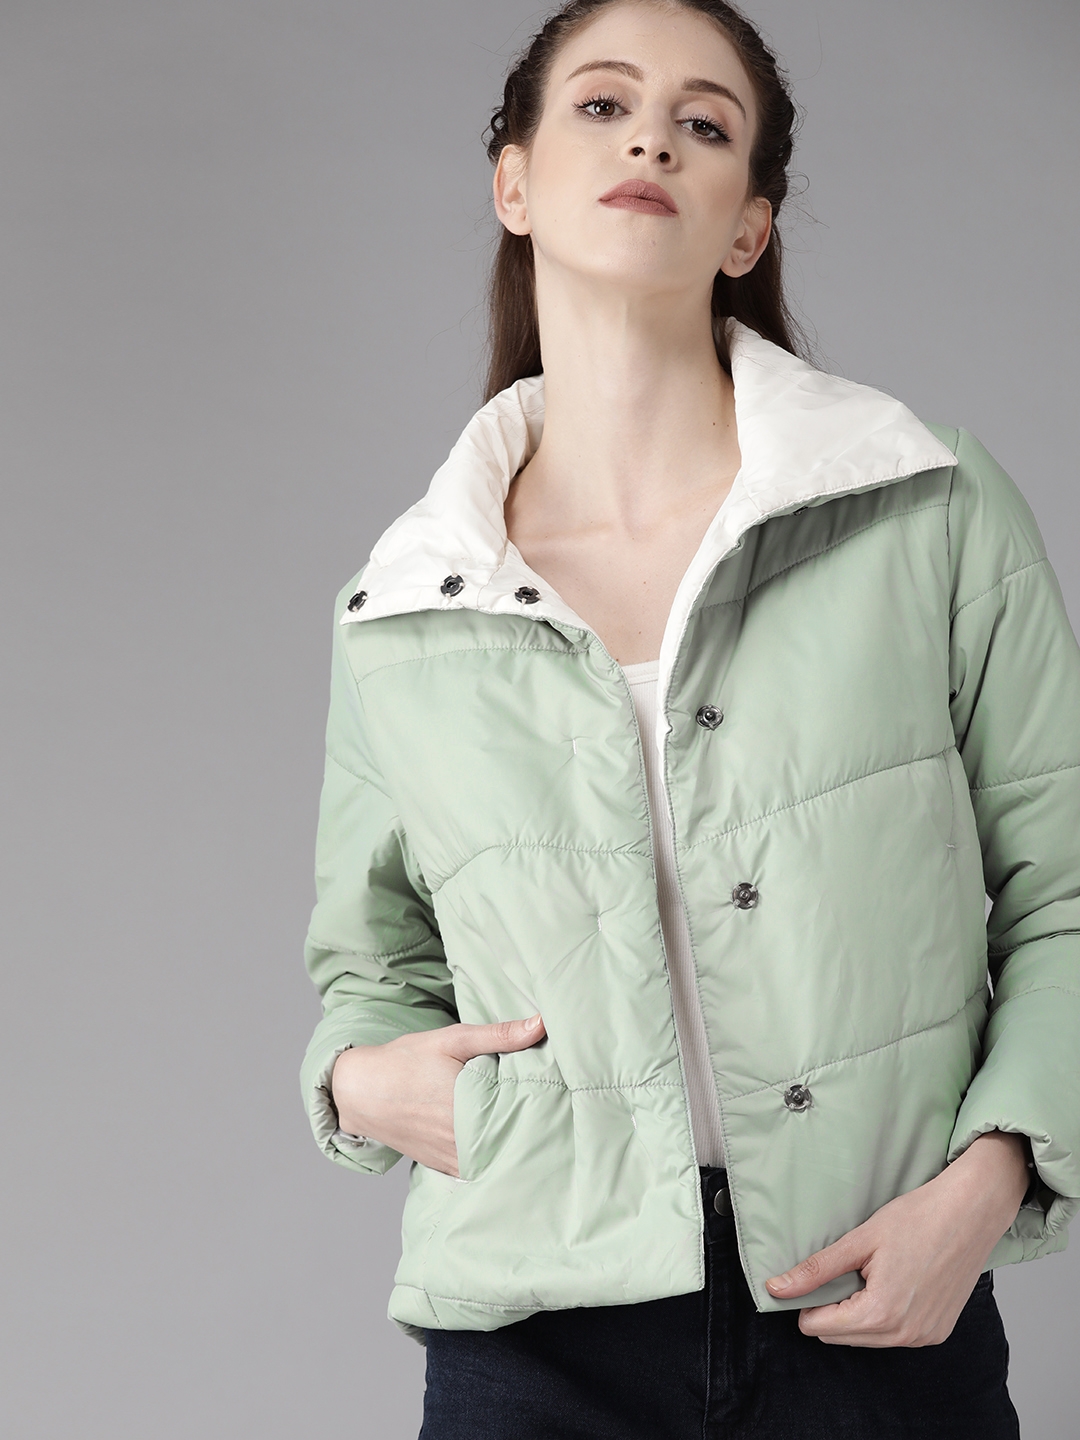 Unveil more than 272 myntra ladies jacket super hot